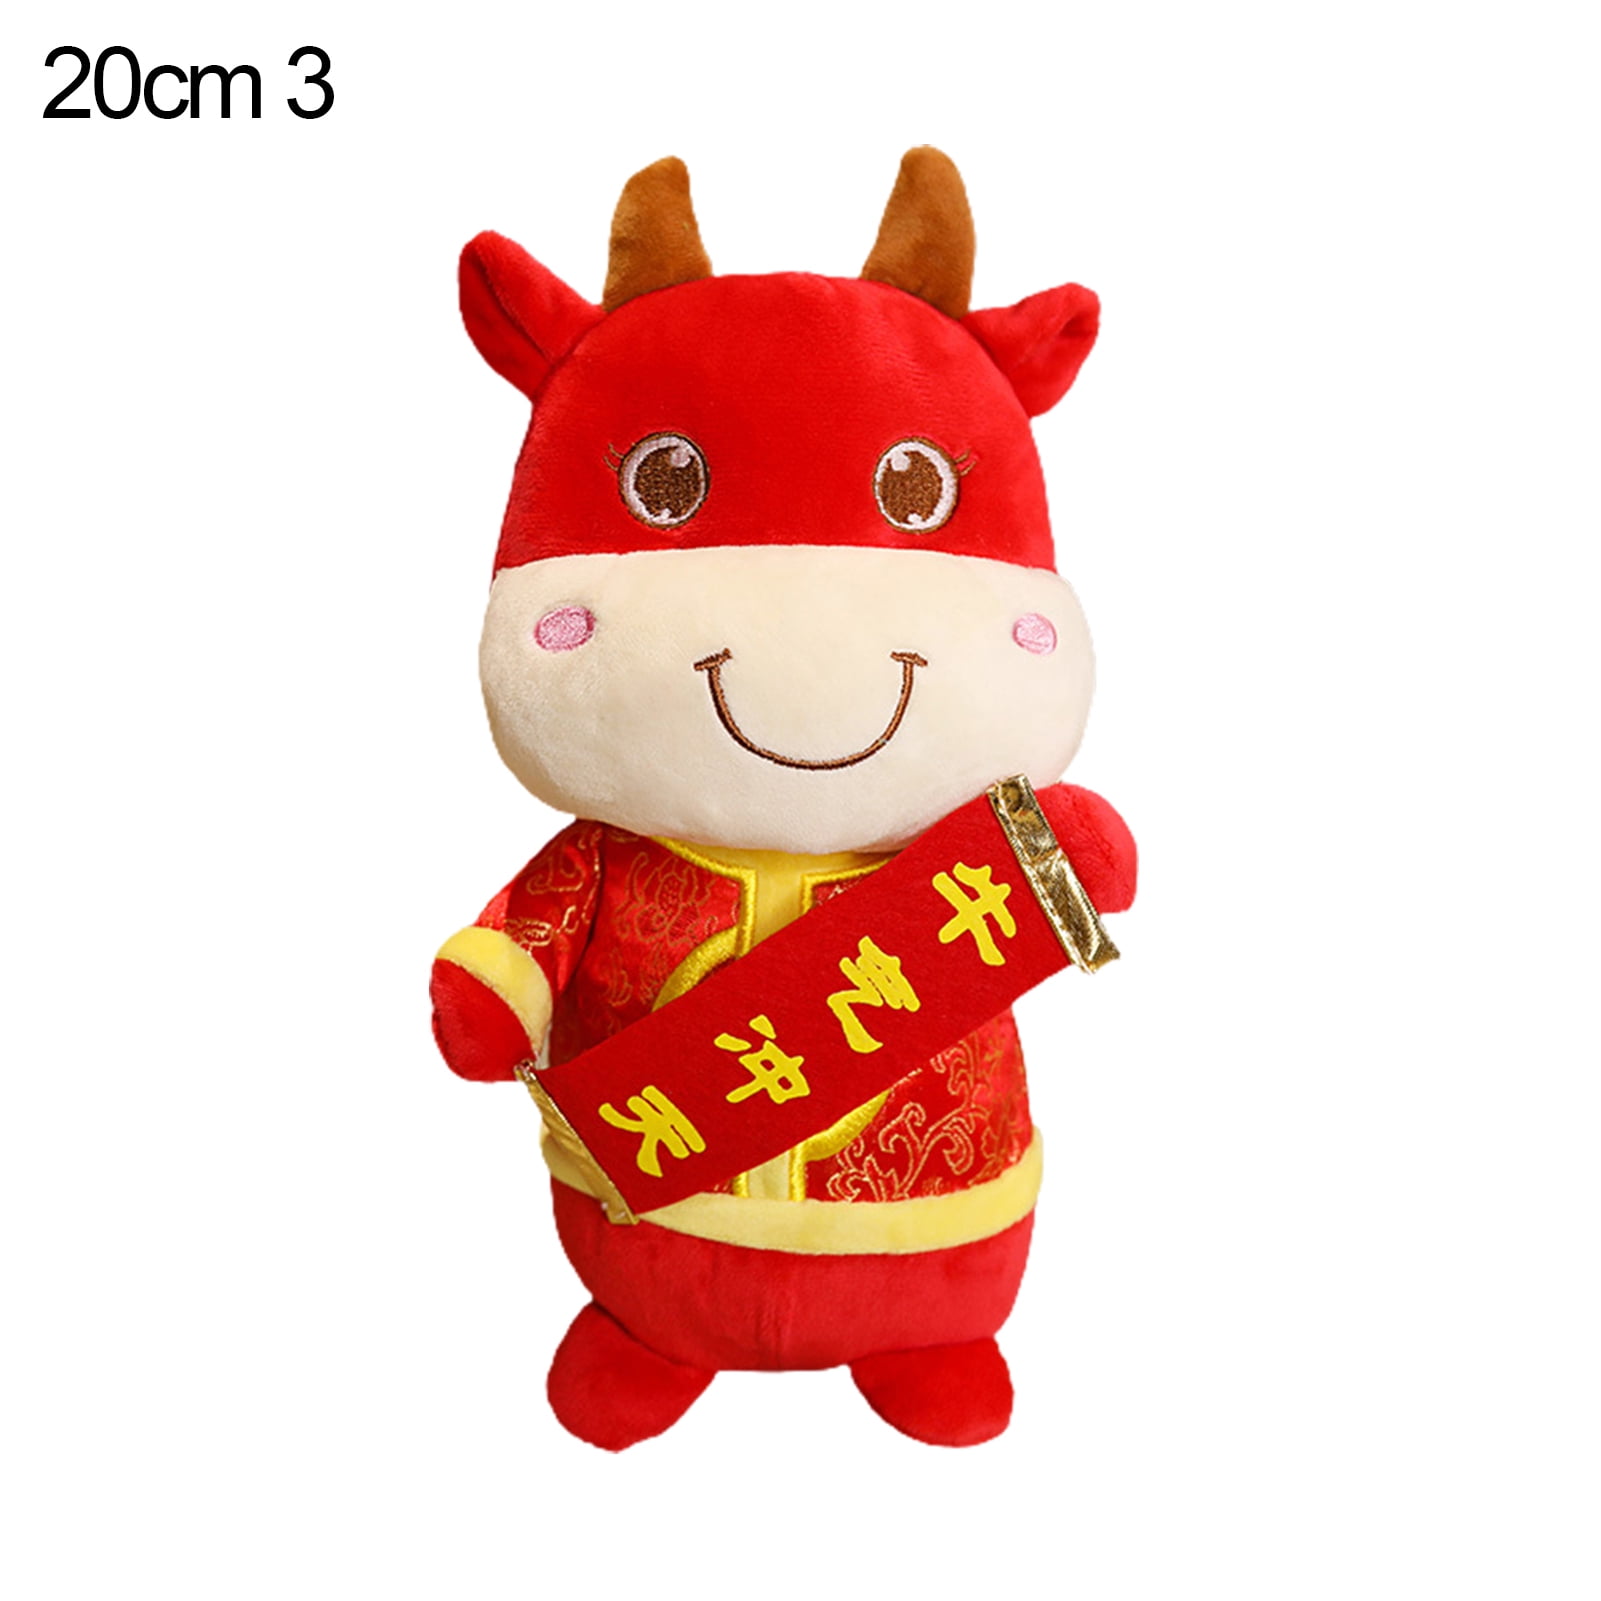 Details about   Cotton Pig Stuffed Animal Doll Cute Pig Cartoon Plush Doll Toys For Baby 20 cm 